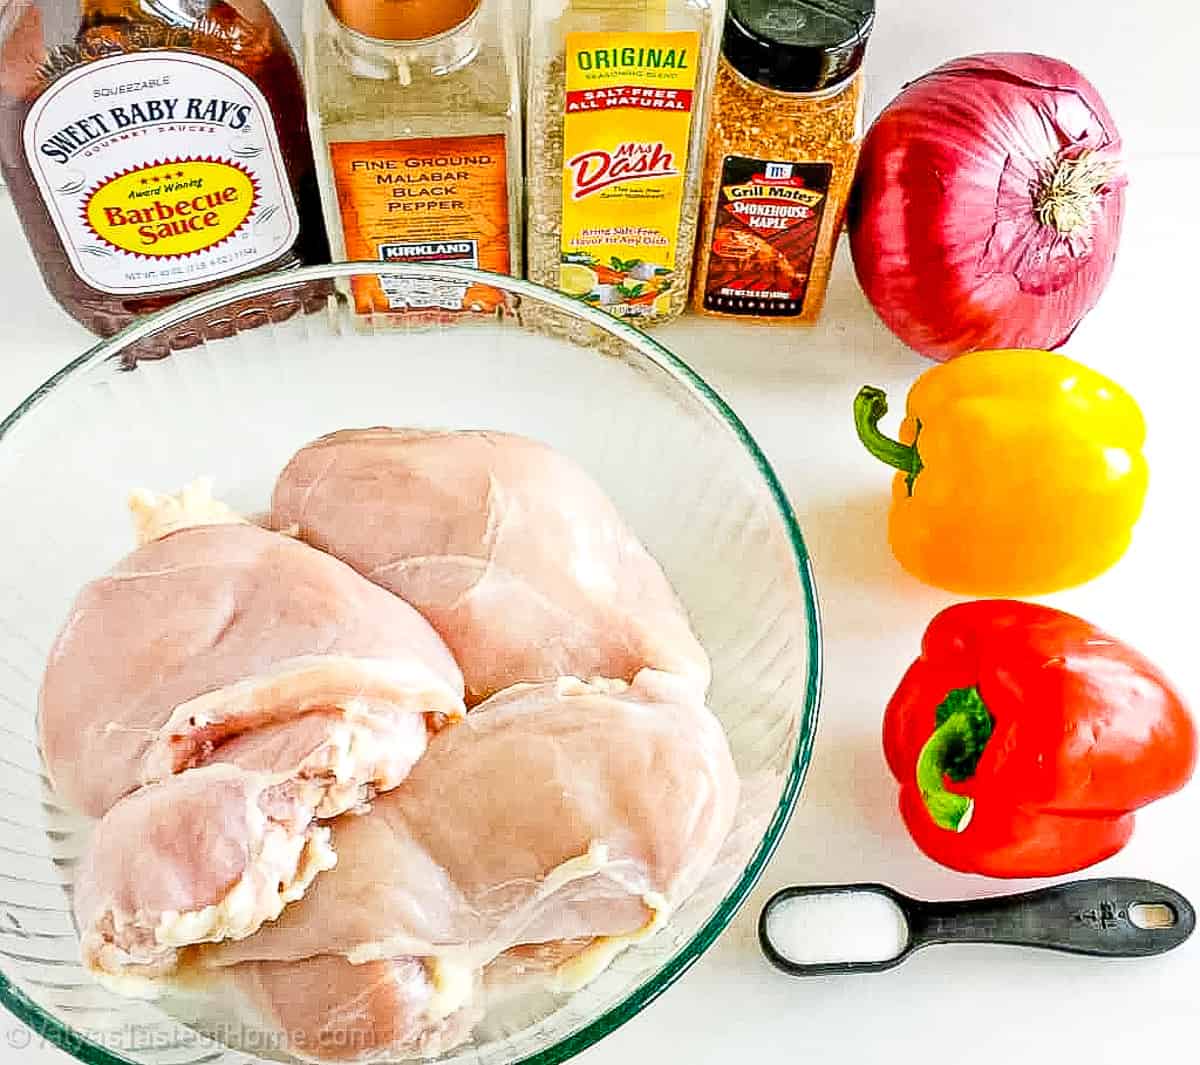 All you need are some simple, pantry staple ingredients to make this delicious BBQ chicken at home.